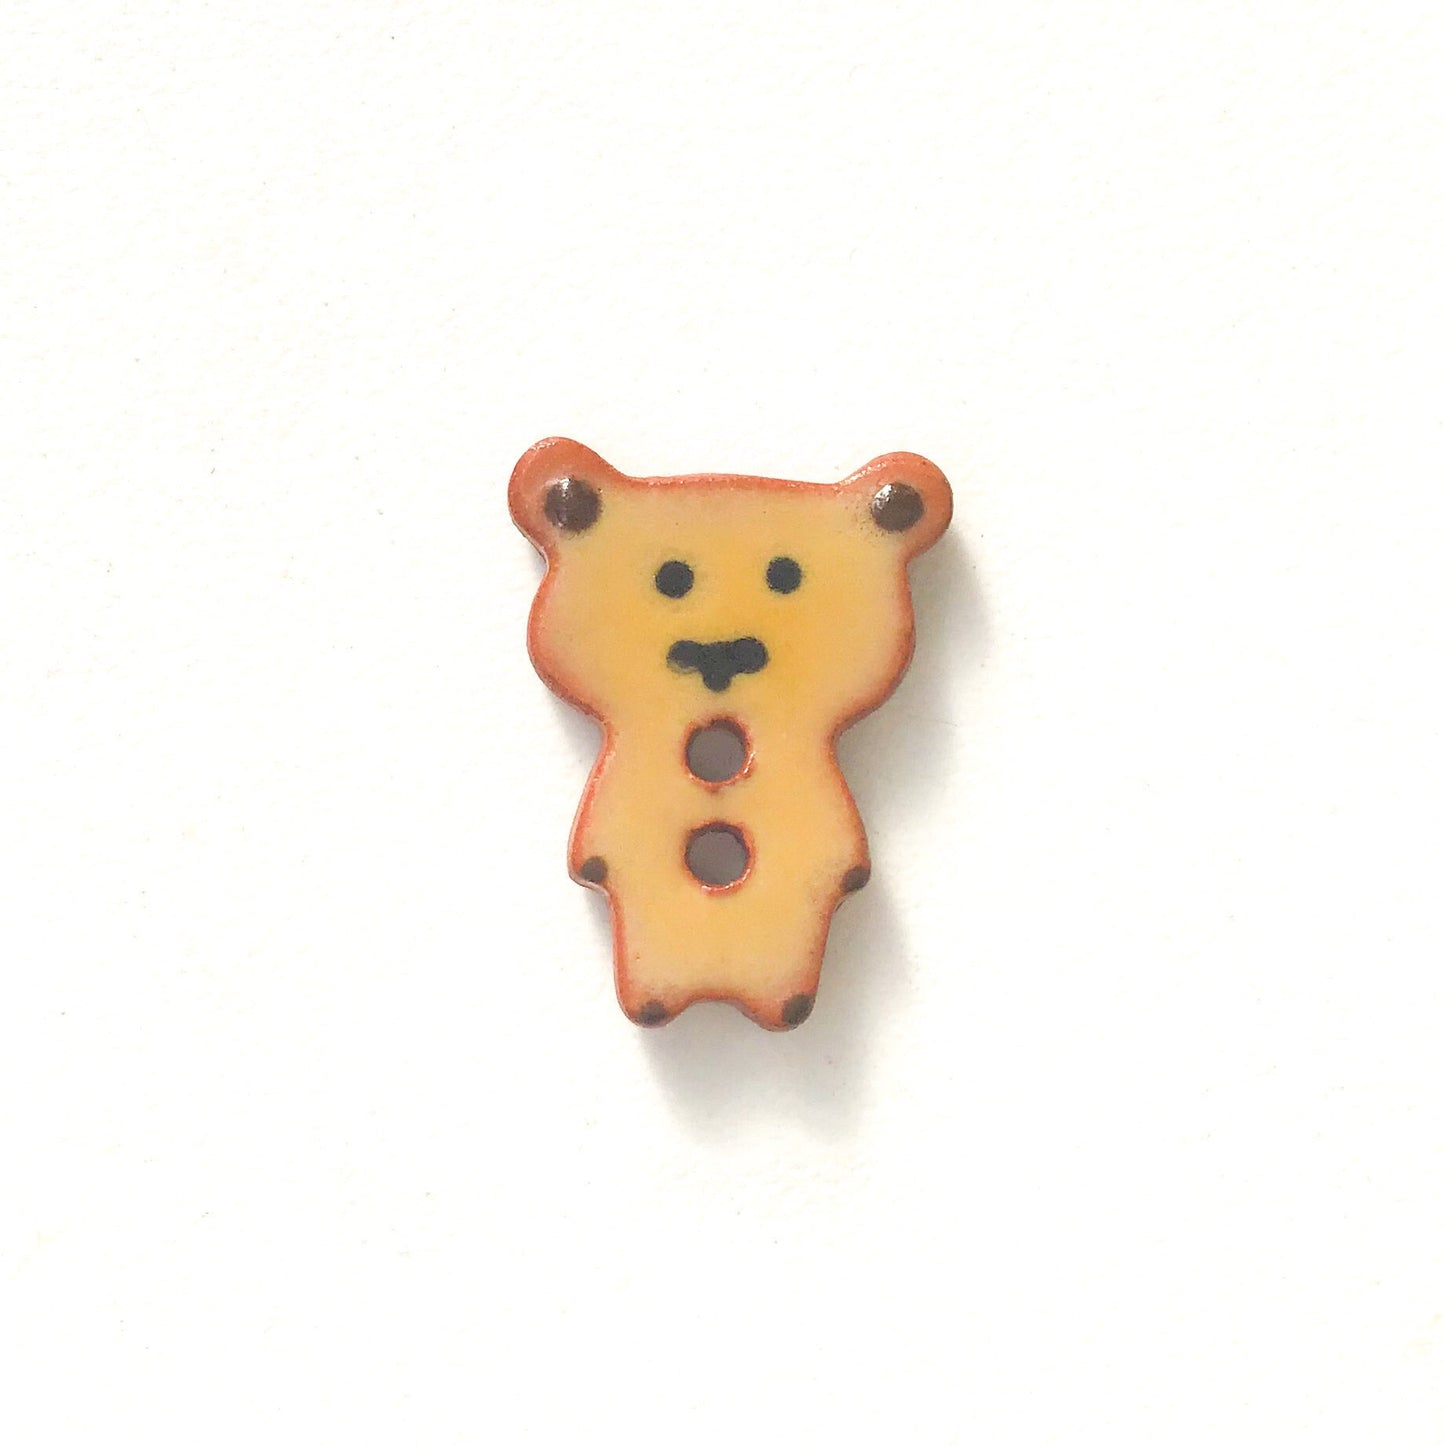 (Wholesale Accounts Only) 5/8" x 3/4" Teddy Bear - flat - red clay